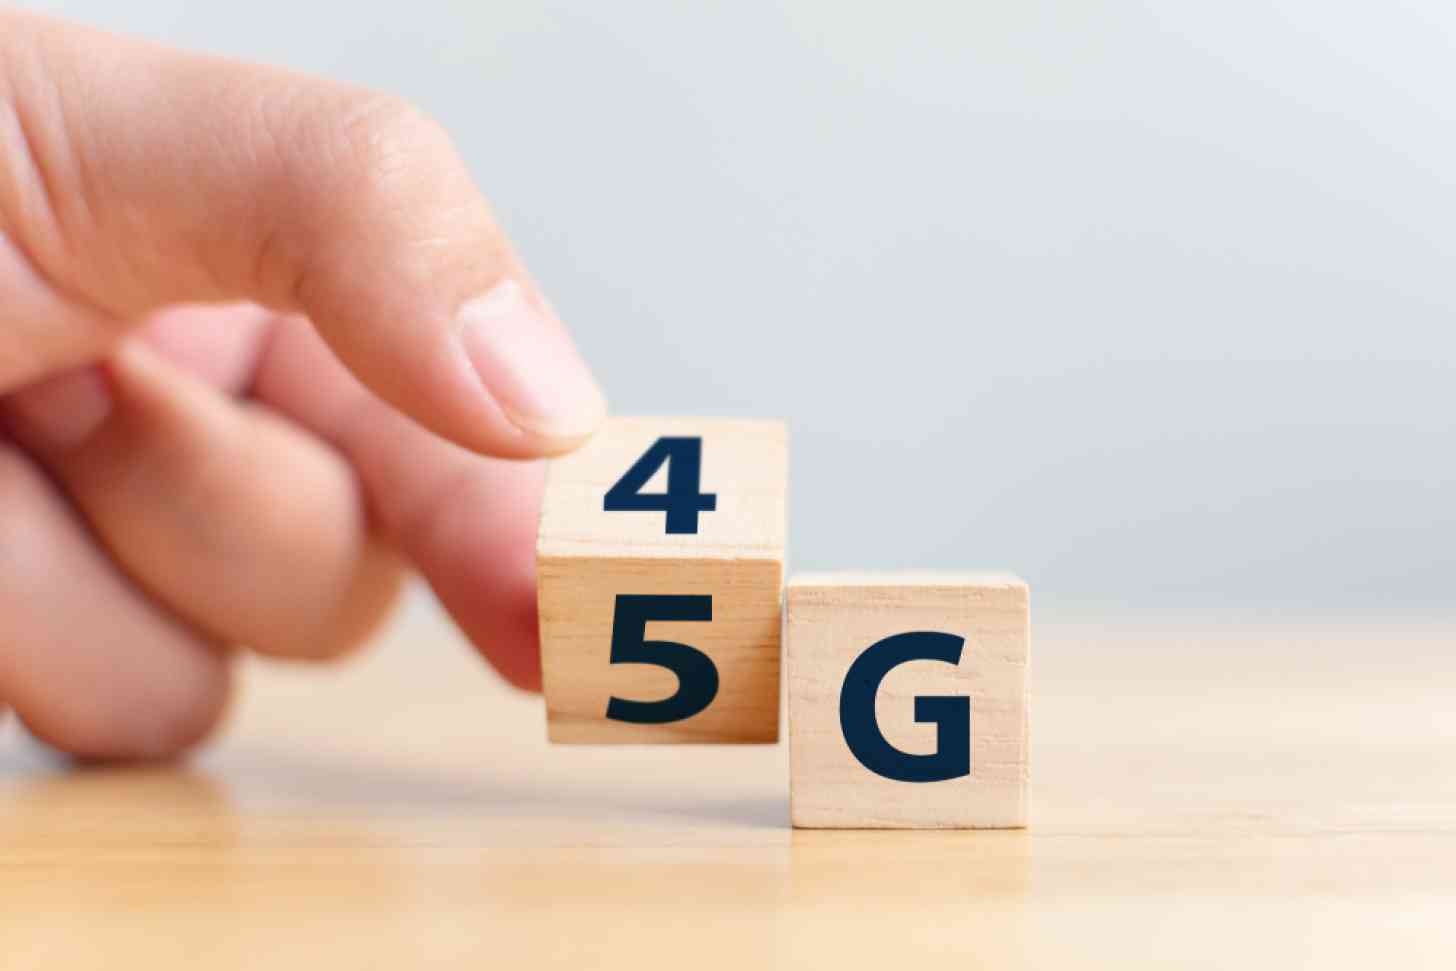 us-mobile-5g-network-launch-soon